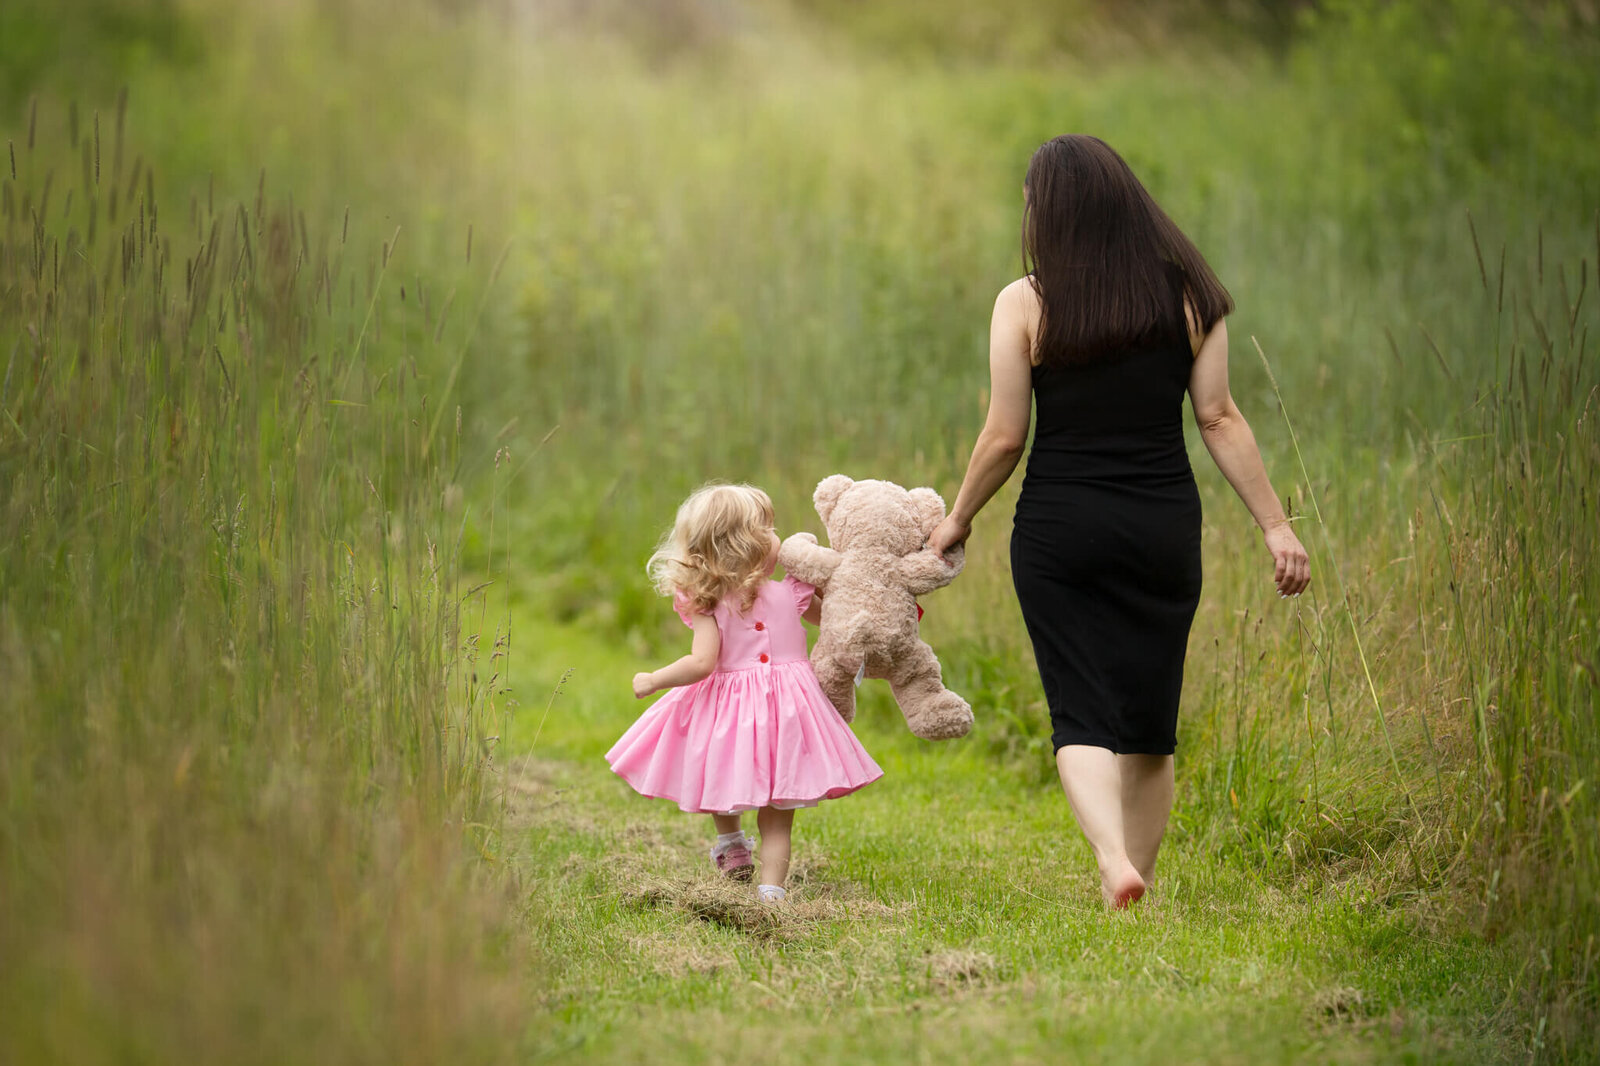 MOther in a black dress walking with two year old daughter in pink dress both holding hands of a teddy bear